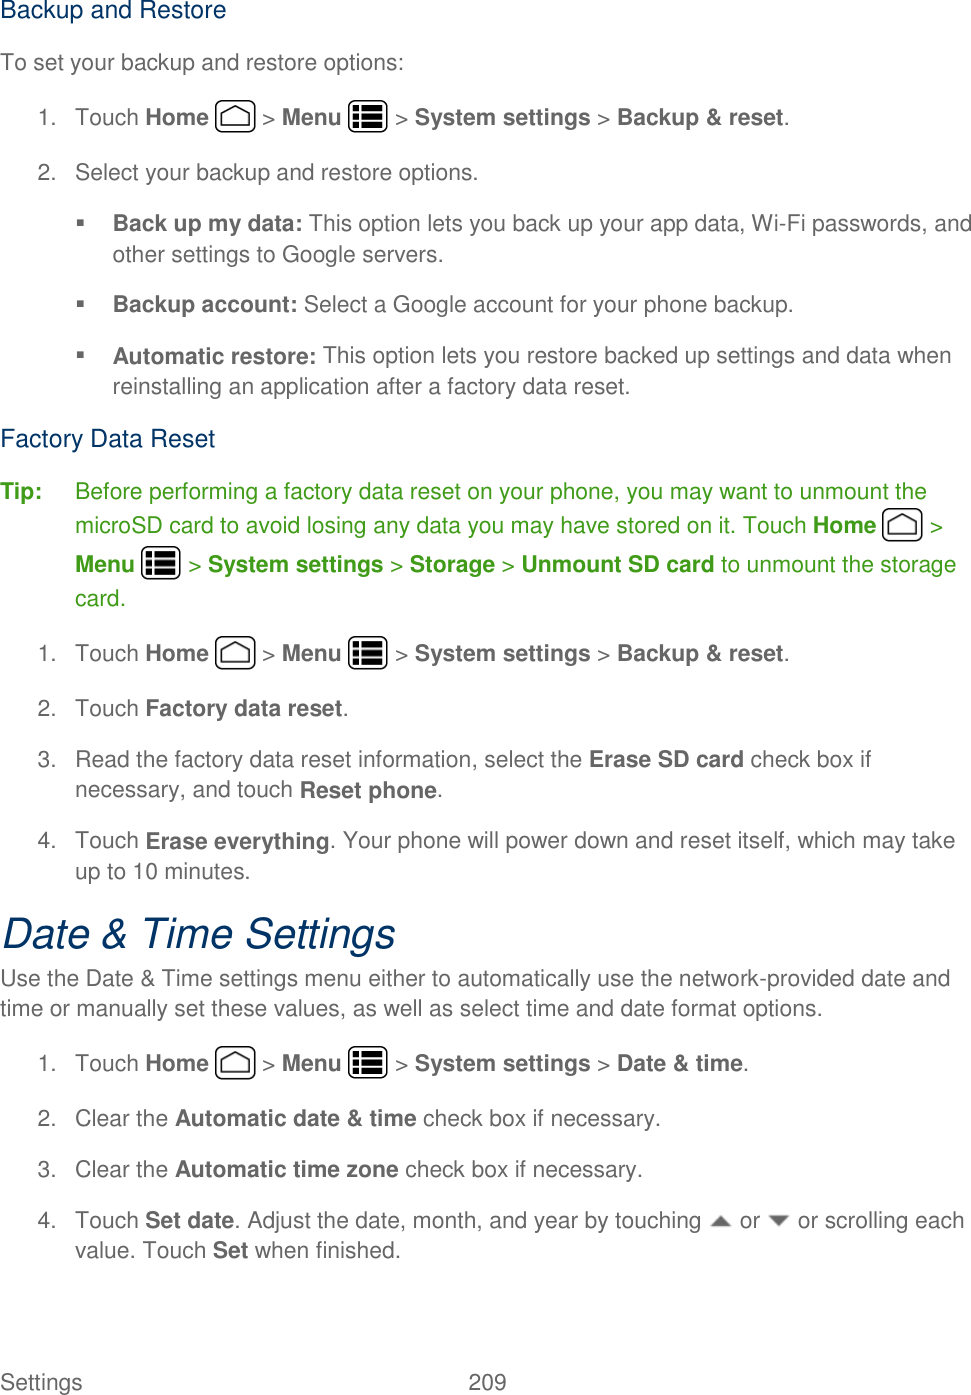 Settings    209 Backup and Restore To set your backup and restore options: 1.  Touch Home   &gt; Menu   &gt; System settings &gt; Backup &amp; reset. 2.  Select your backup and restore options.  Back up my data: This option lets you back up your app data, Wi-Fi passwords, and other settings to Google servers.  Backup account: Select a Google account for your phone backup.  Automatic restore: This option lets you restore backed up settings and data when reinstalling an application after a factory data reset. Factory Data Reset Tip:  Before performing a factory data reset on your phone, you may want to unmount the microSD card to avoid losing any data you may have stored on it. Touch Home   &gt; Menu   &gt; System settings &gt; Storage &gt; Unmount SD card to unmount the storage card. 1.  Touch Home   &gt; Menu   &gt; System settings &gt; Backup &amp; reset. 2.  Touch Factory data reset. 3.  Read the factory data reset information, select the Erase SD card check box if necessary, and touch Reset phone. 4.  Touch Erase everything. Your phone will power down and reset itself, which may take up to 10 minutes. Date &amp; Time Settings Use the Date &amp; Time settings menu either to automatically use the network-provided date and time or manually set these values, as well as select time and date format options. 1.  Touch Home   &gt; Menu   &gt; System settings &gt; Date &amp; time. 2.  Clear the Automatic date &amp; time check box if necessary. 3.  Clear the Automatic time zone check box if necessary. 4.  Touch Set date. Adjust the date, month, and year by touching   or   or scrolling each value. Touch Set when finished. 